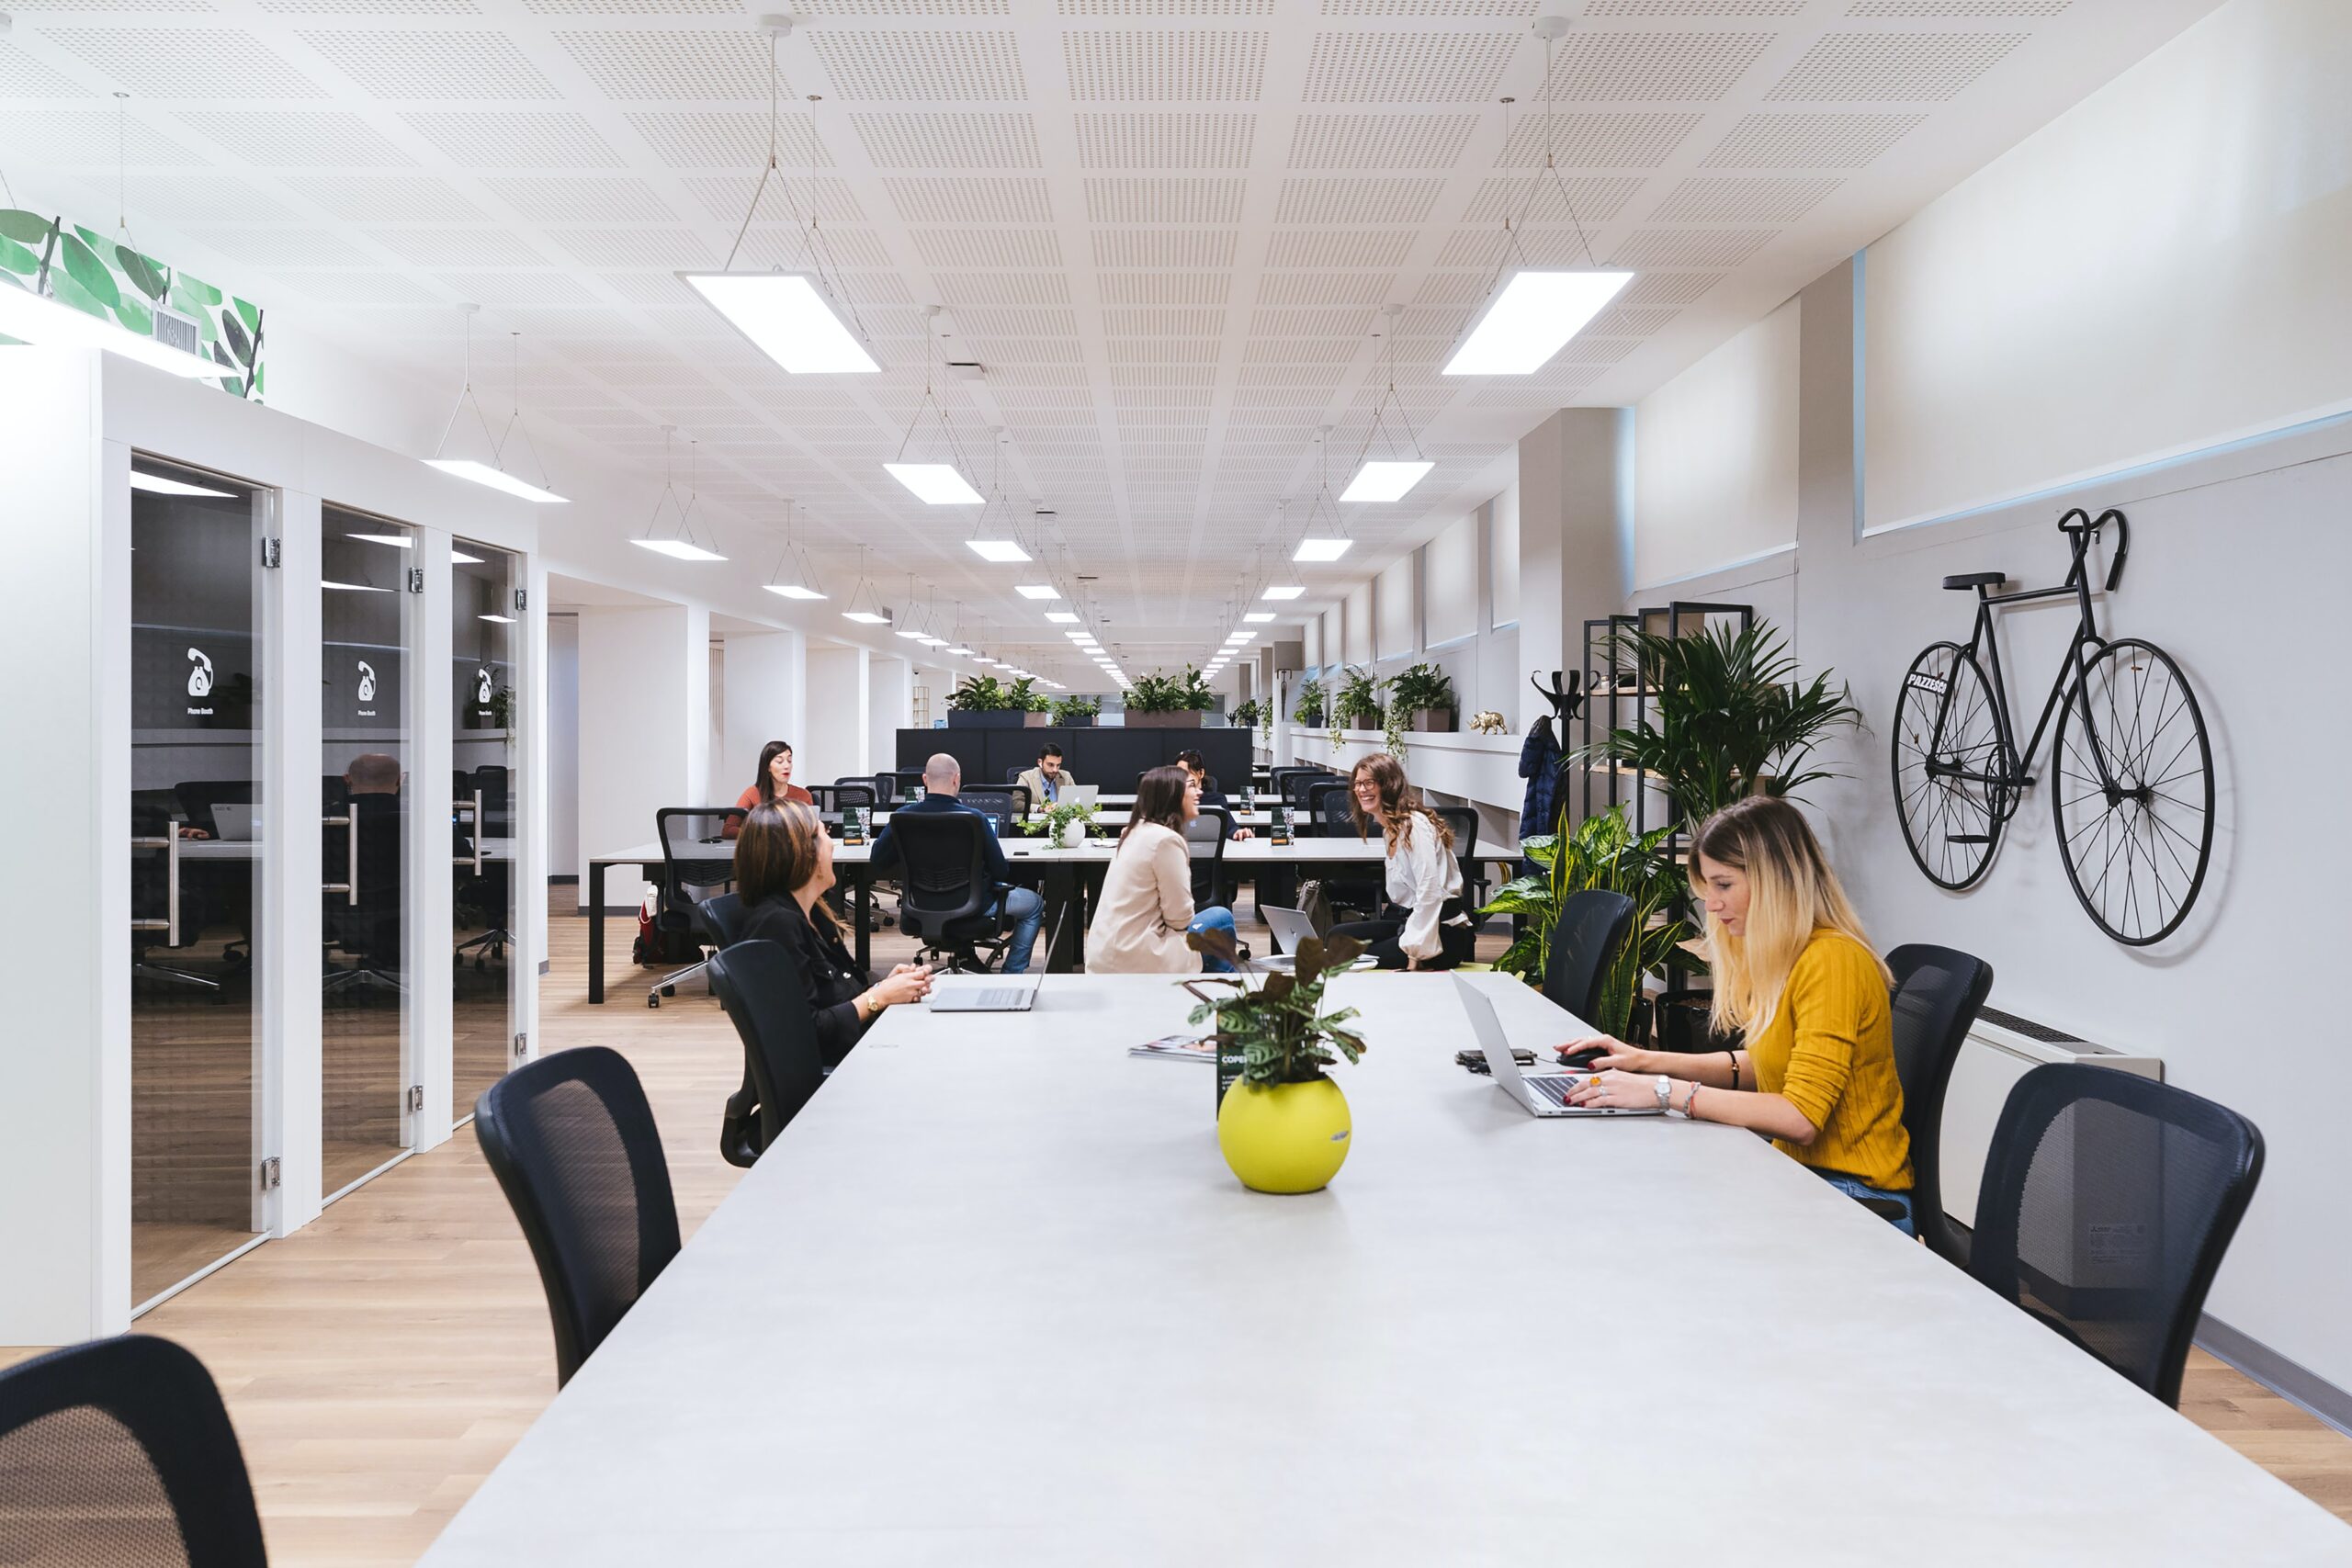 Tips To Build Community In Coworking Spaces